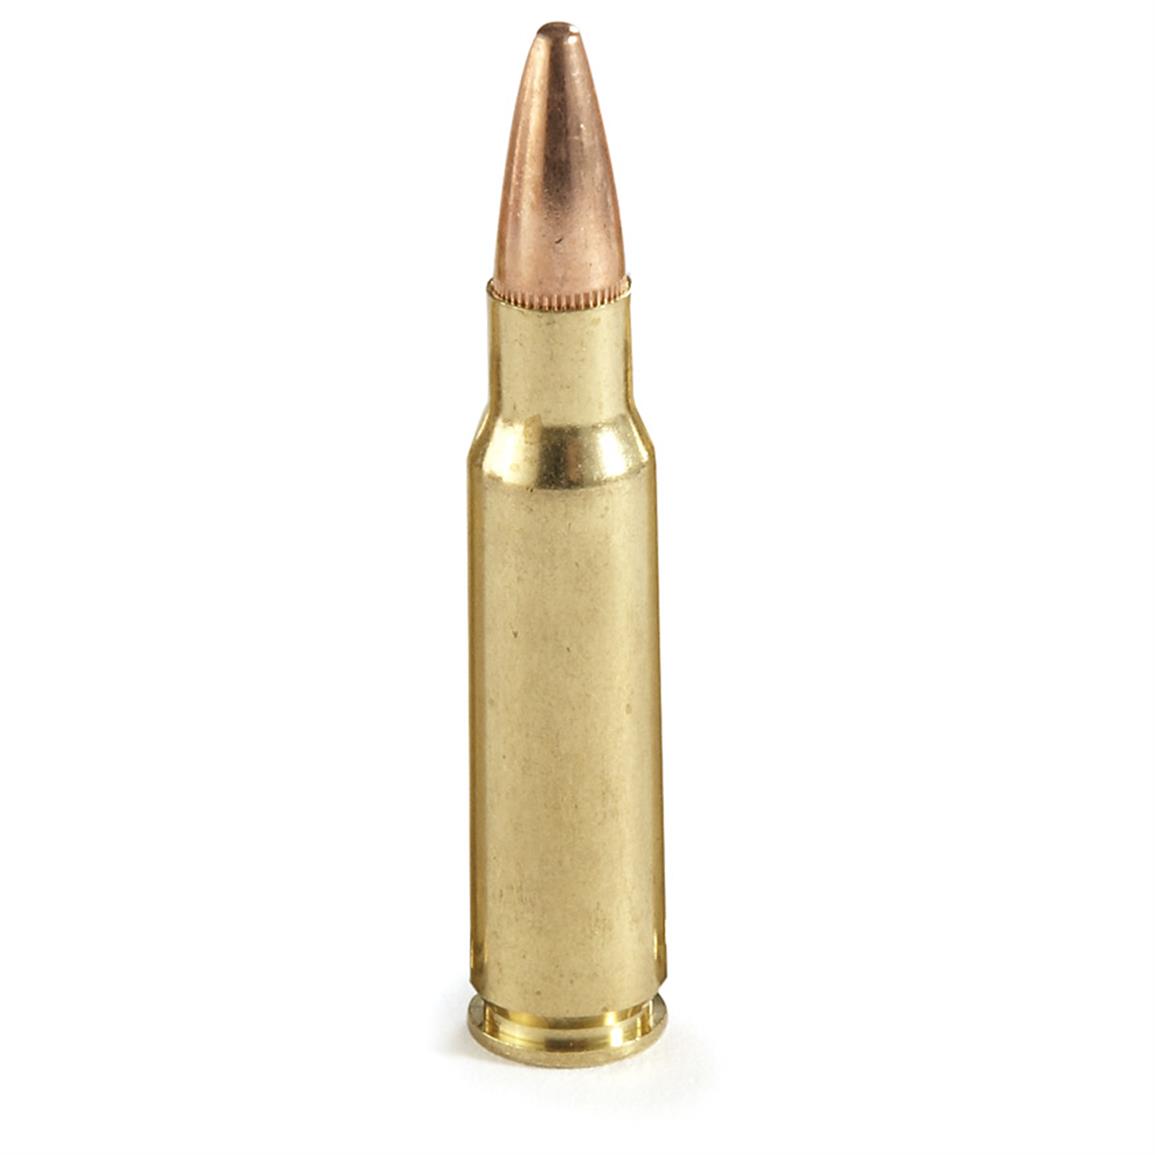 Wolf WPA Military Classic, 7.62x54R, 148 Grain, FMJ, 500 Rounds .